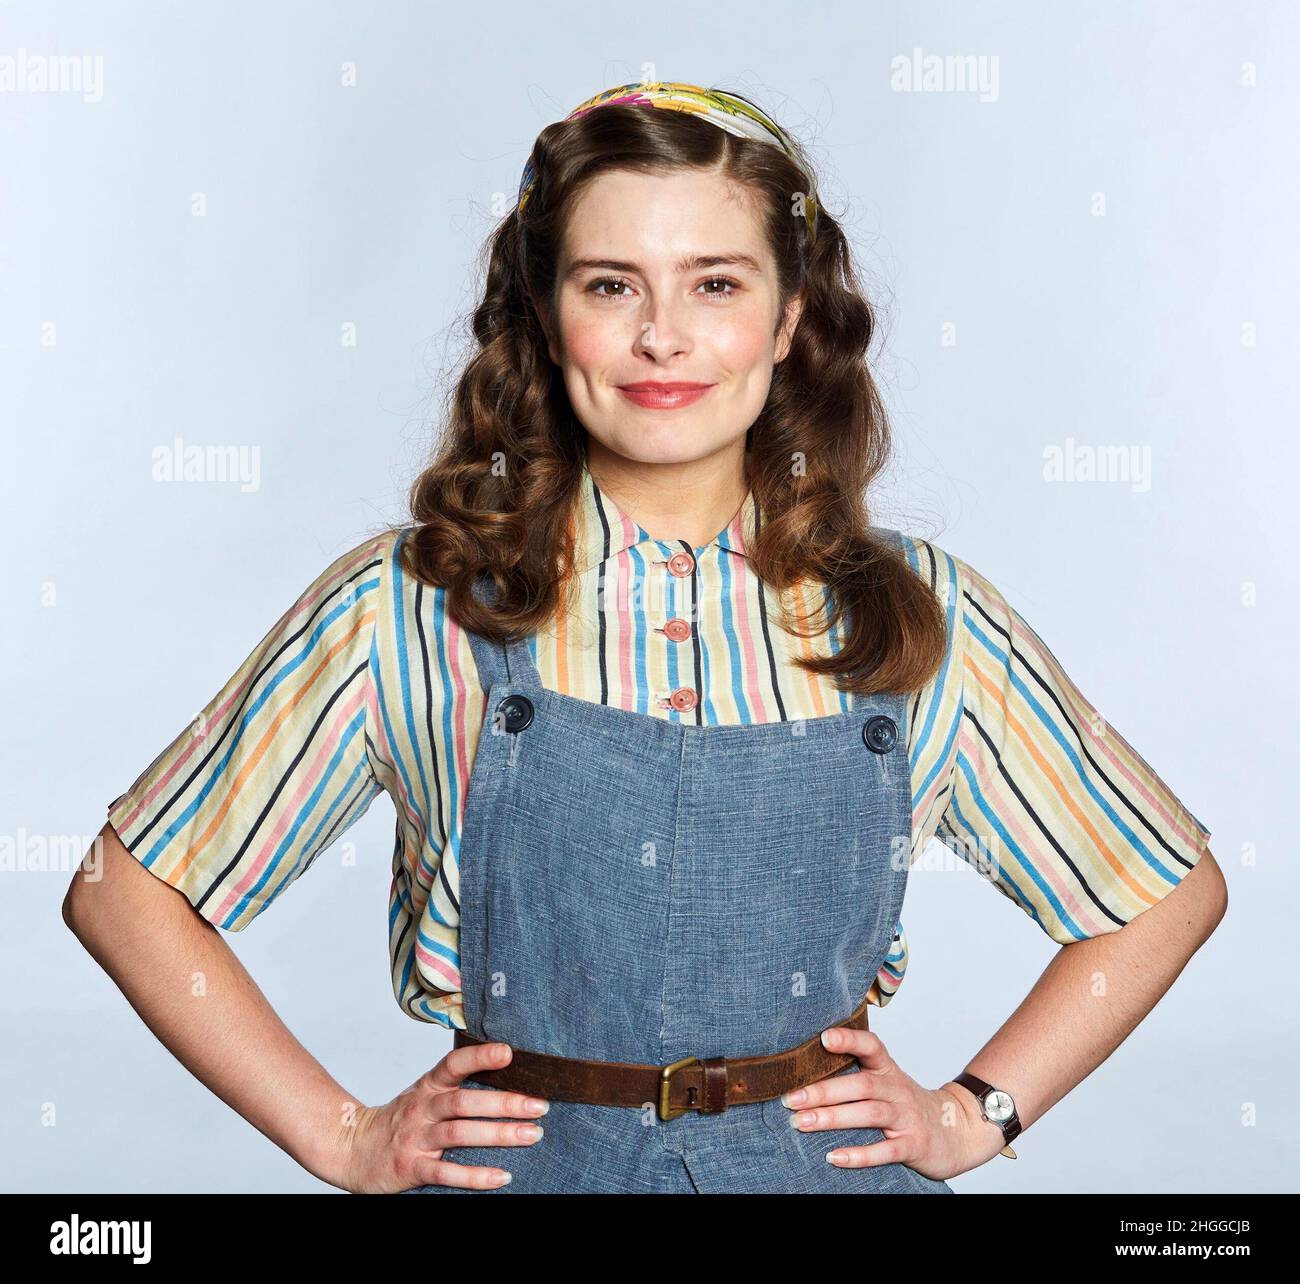 RACHEL SHENTON in ALL CREATURES GREAT AND SMALL (2020), directed by BRIAN PERCIVAL and ANDY HAY. Credit: Playground Entertainment / Album Stock Photo